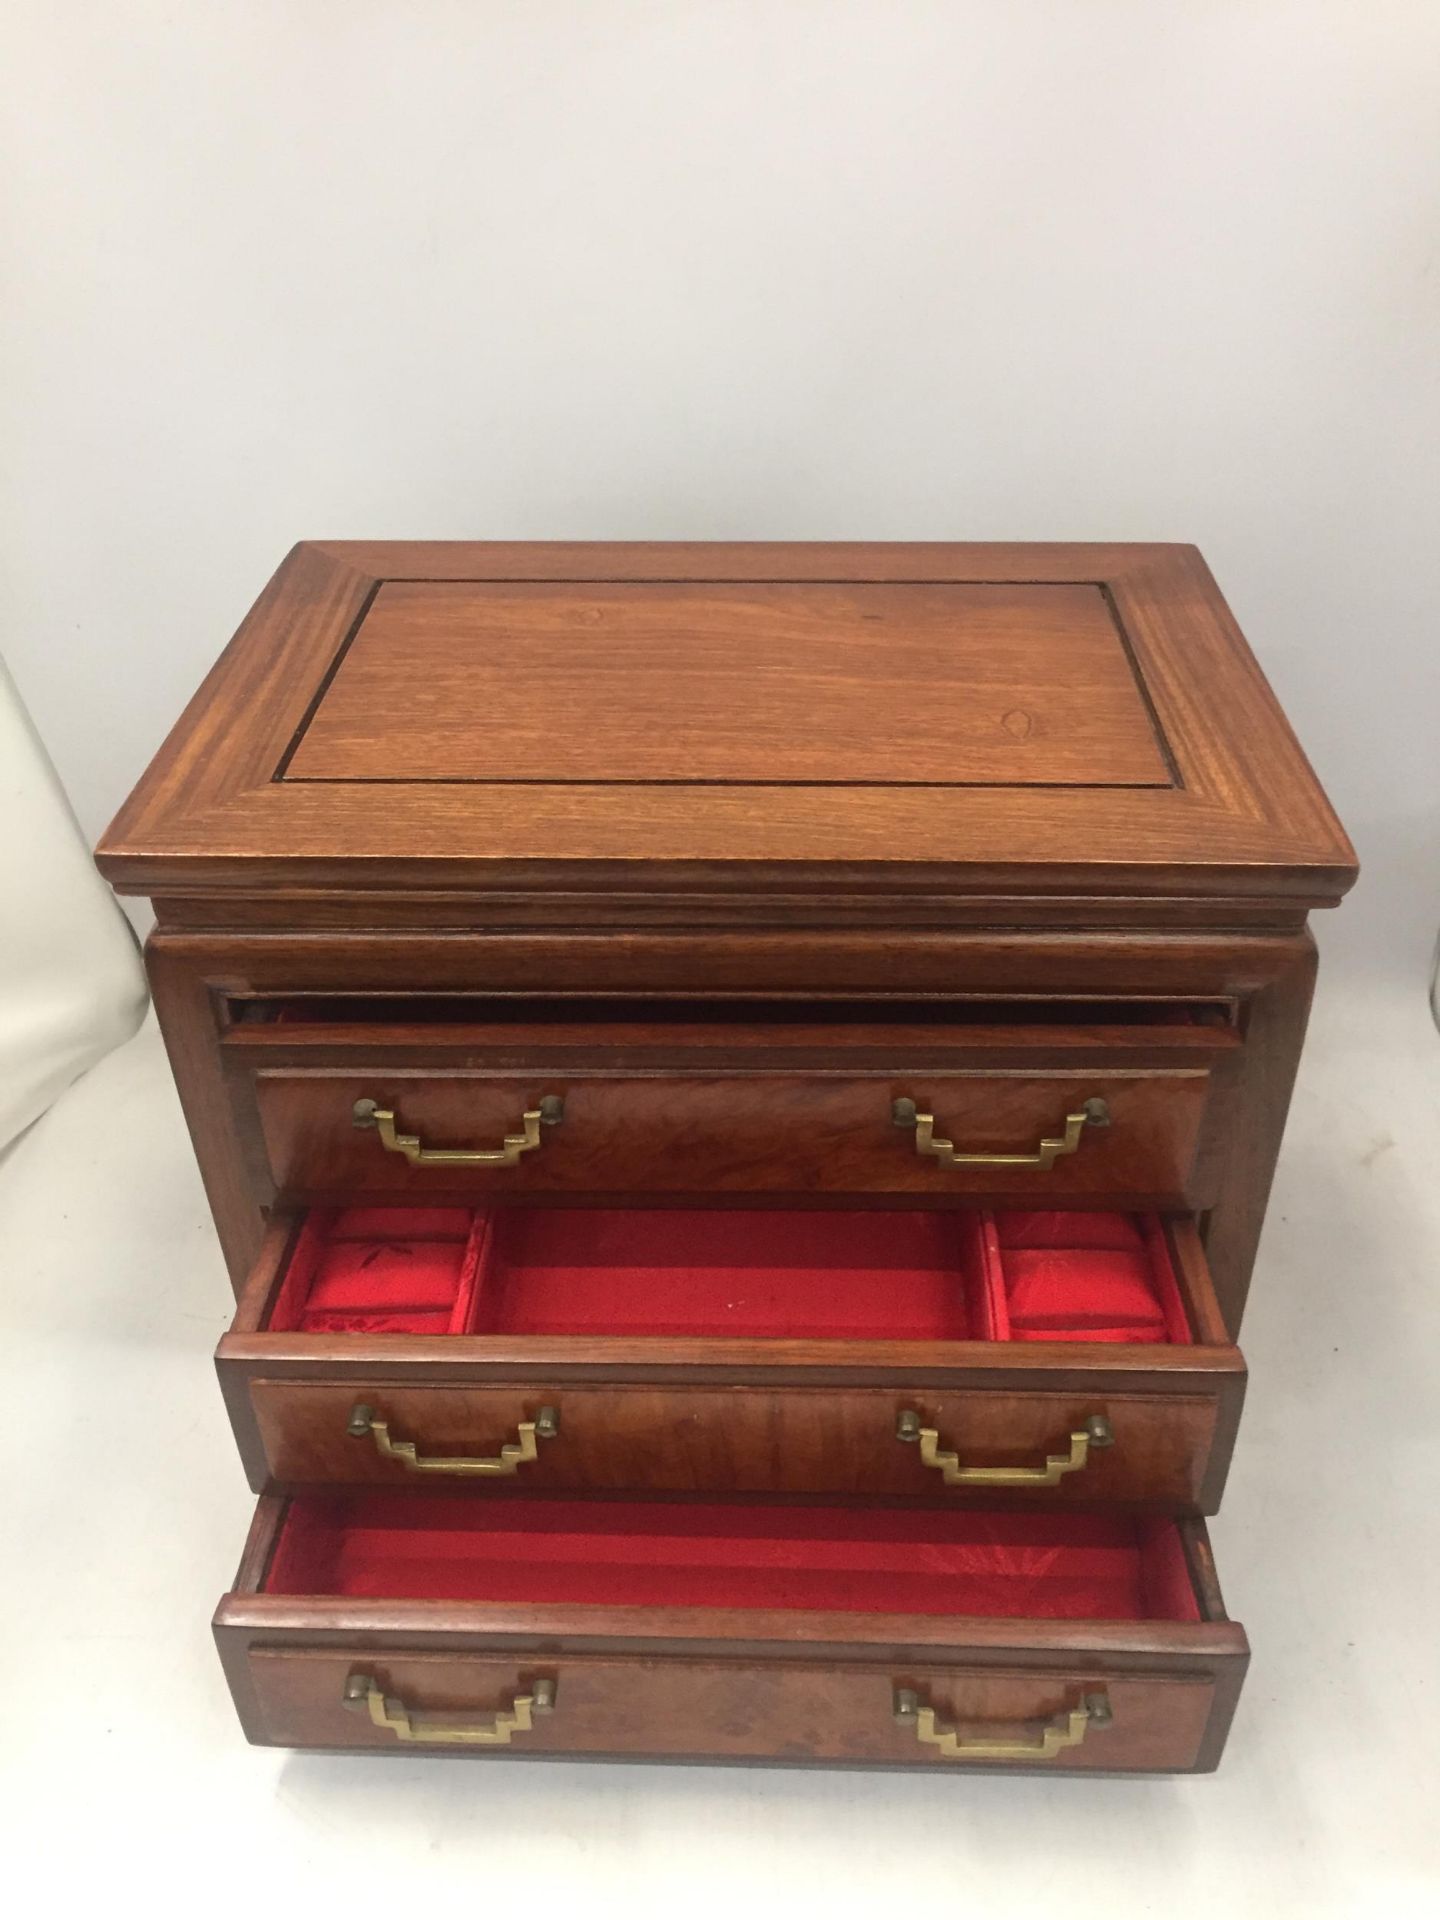 AN ORIENTAL DESIGN YEW WOOD TABLE TOP JEWELLERY CHEST OF THREE DRAWERS, 31 X 20 X 25CM - Image 2 of 3